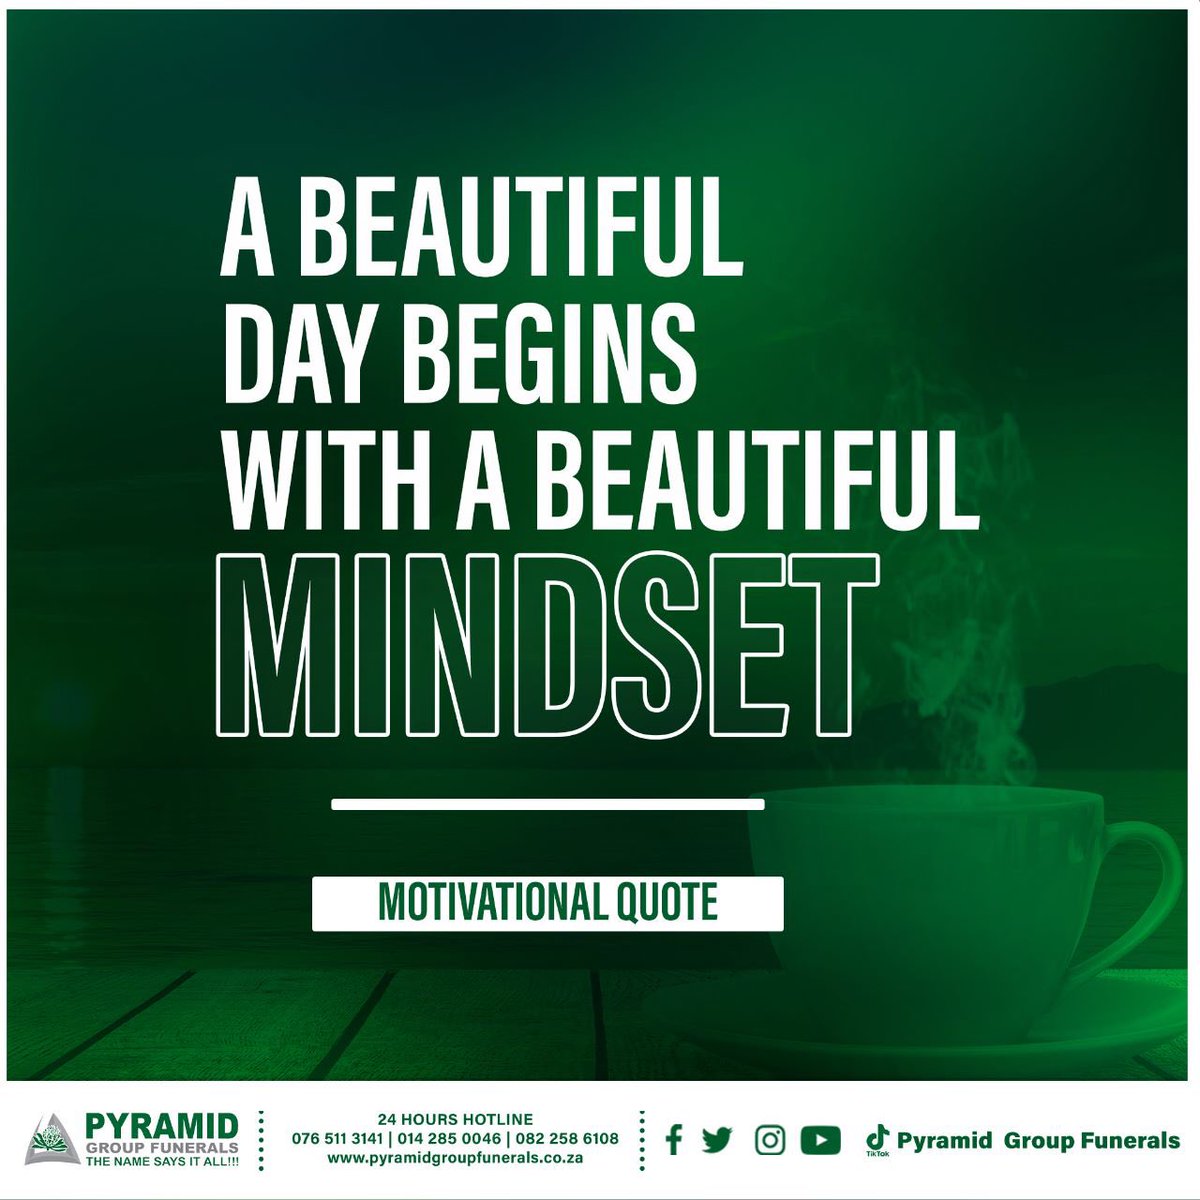 A beautiful day begins with a beautiful mindset #youthmonth2023 #roadto7000 #youth #7000activeclients #monday #mondaymotivation #mondaymood #mondayvibes #mondaymonday #mondaymorning #mondayblues